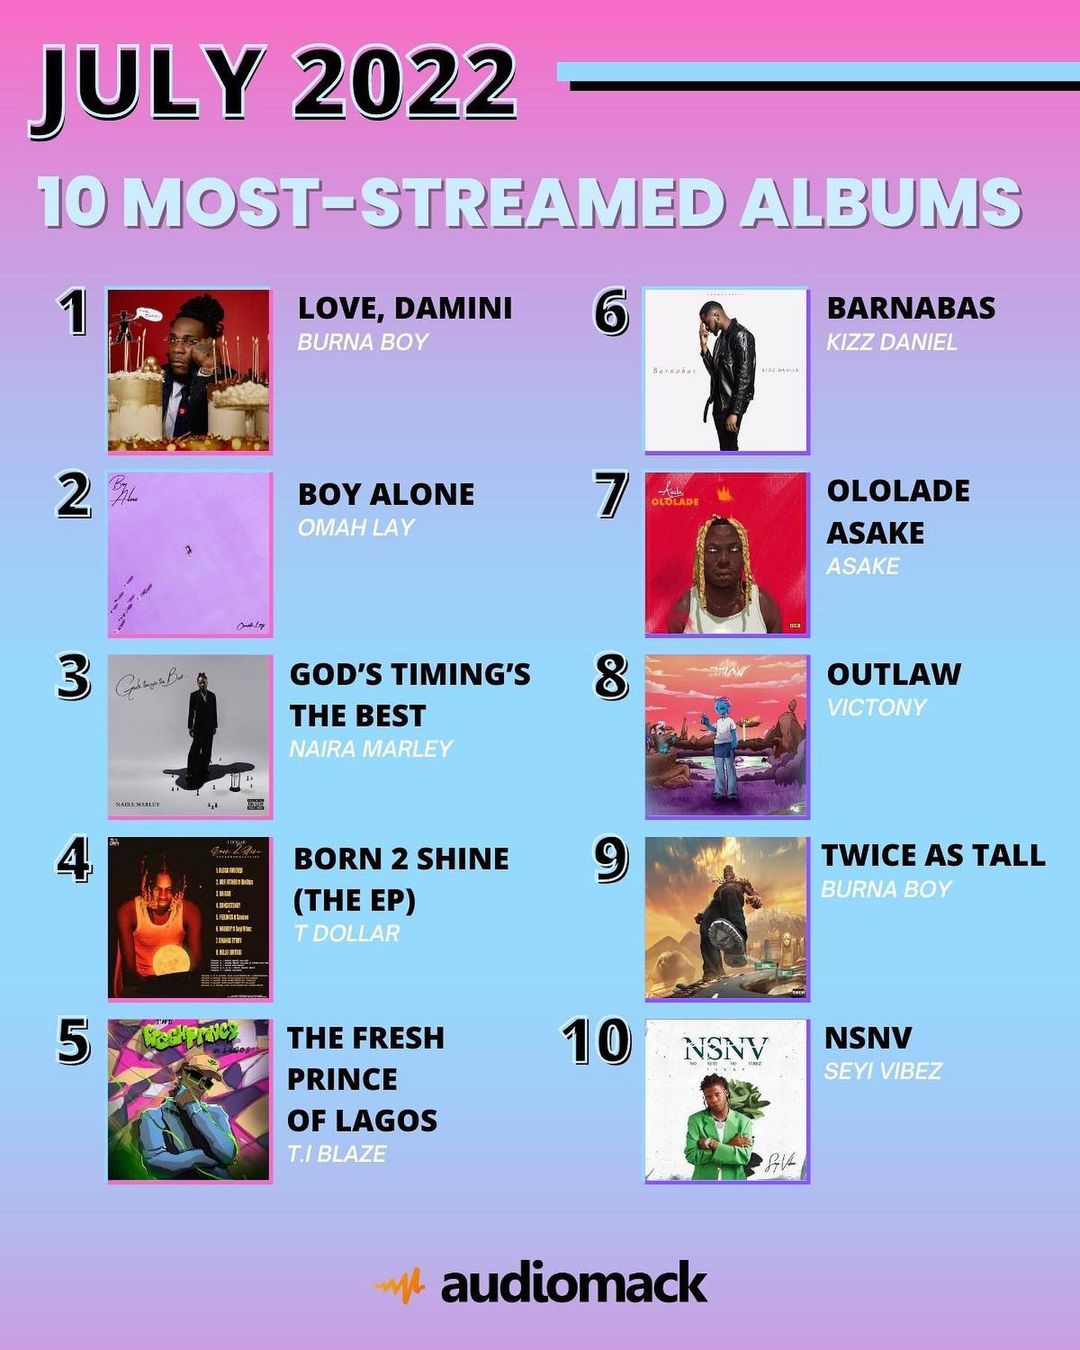 Burna Boy Sets Three Records On Audiomack As ‘Love, Damini’ Emerges Most-Streamed Album For July